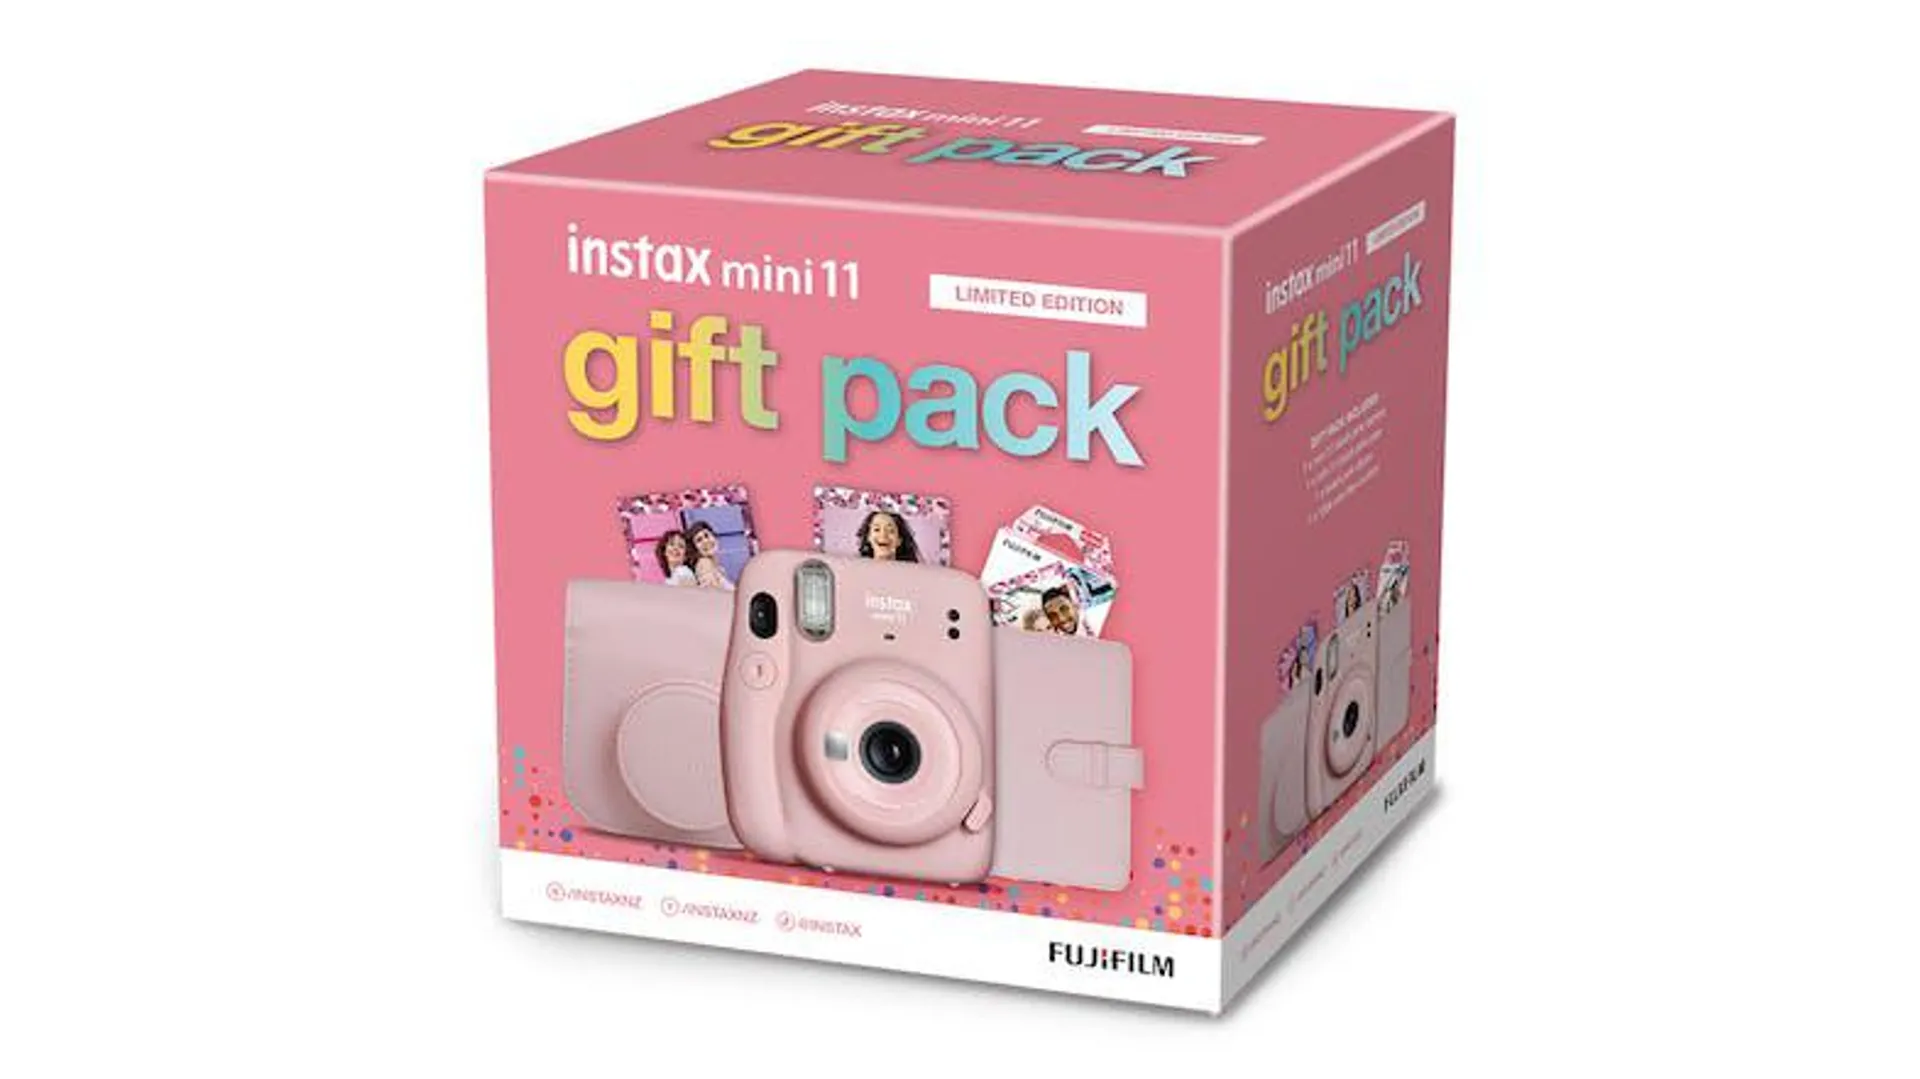 Instax Mini 11 - Blush Pink (Limited Edition Gift Pack)